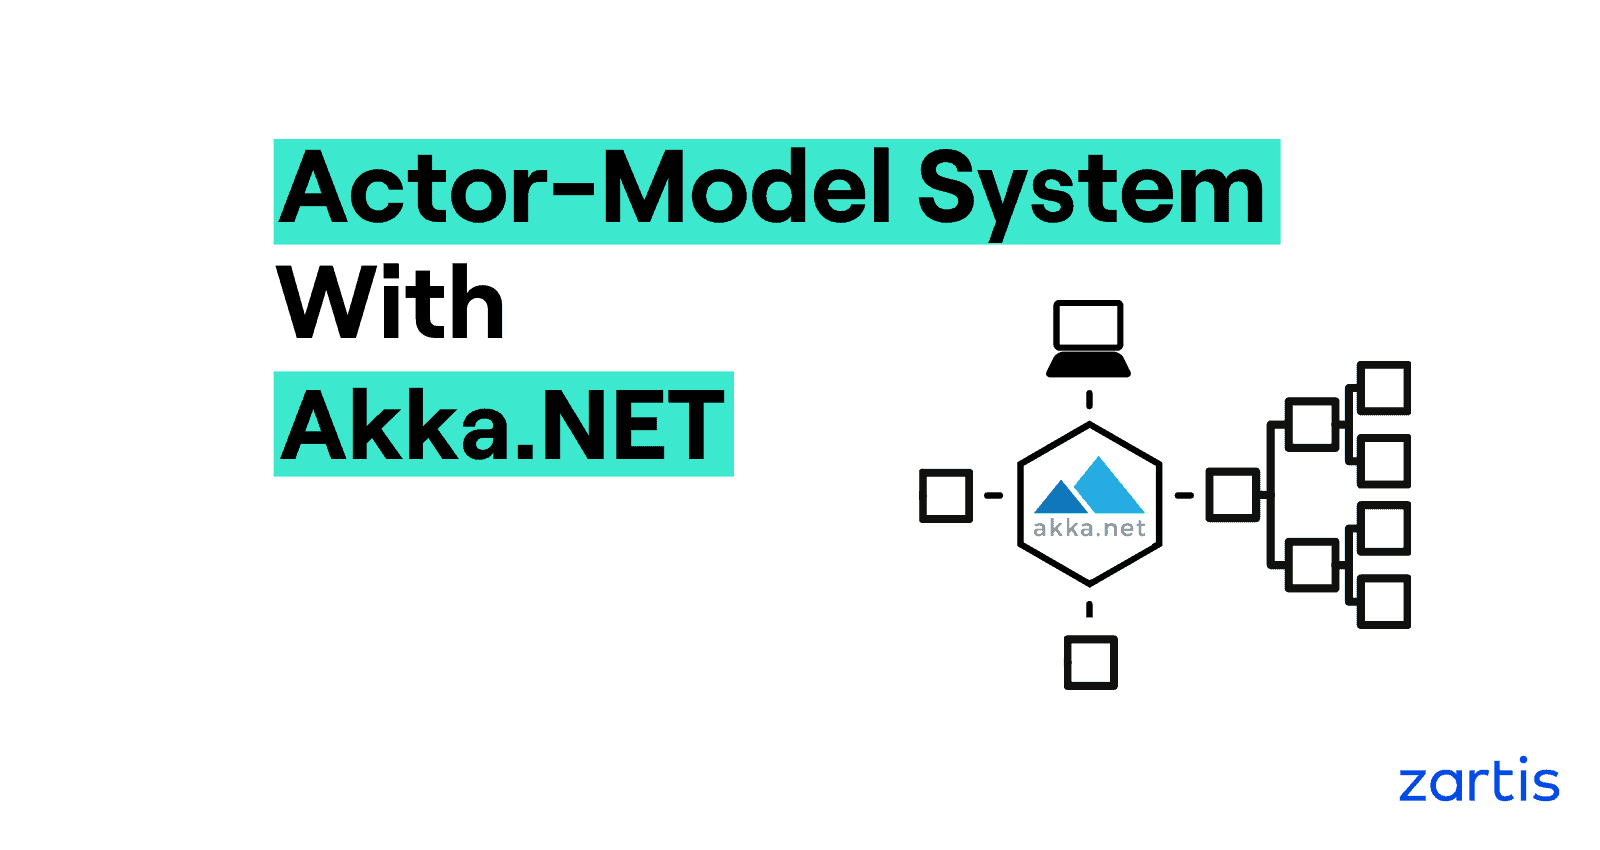 actor-model system with akka.NET